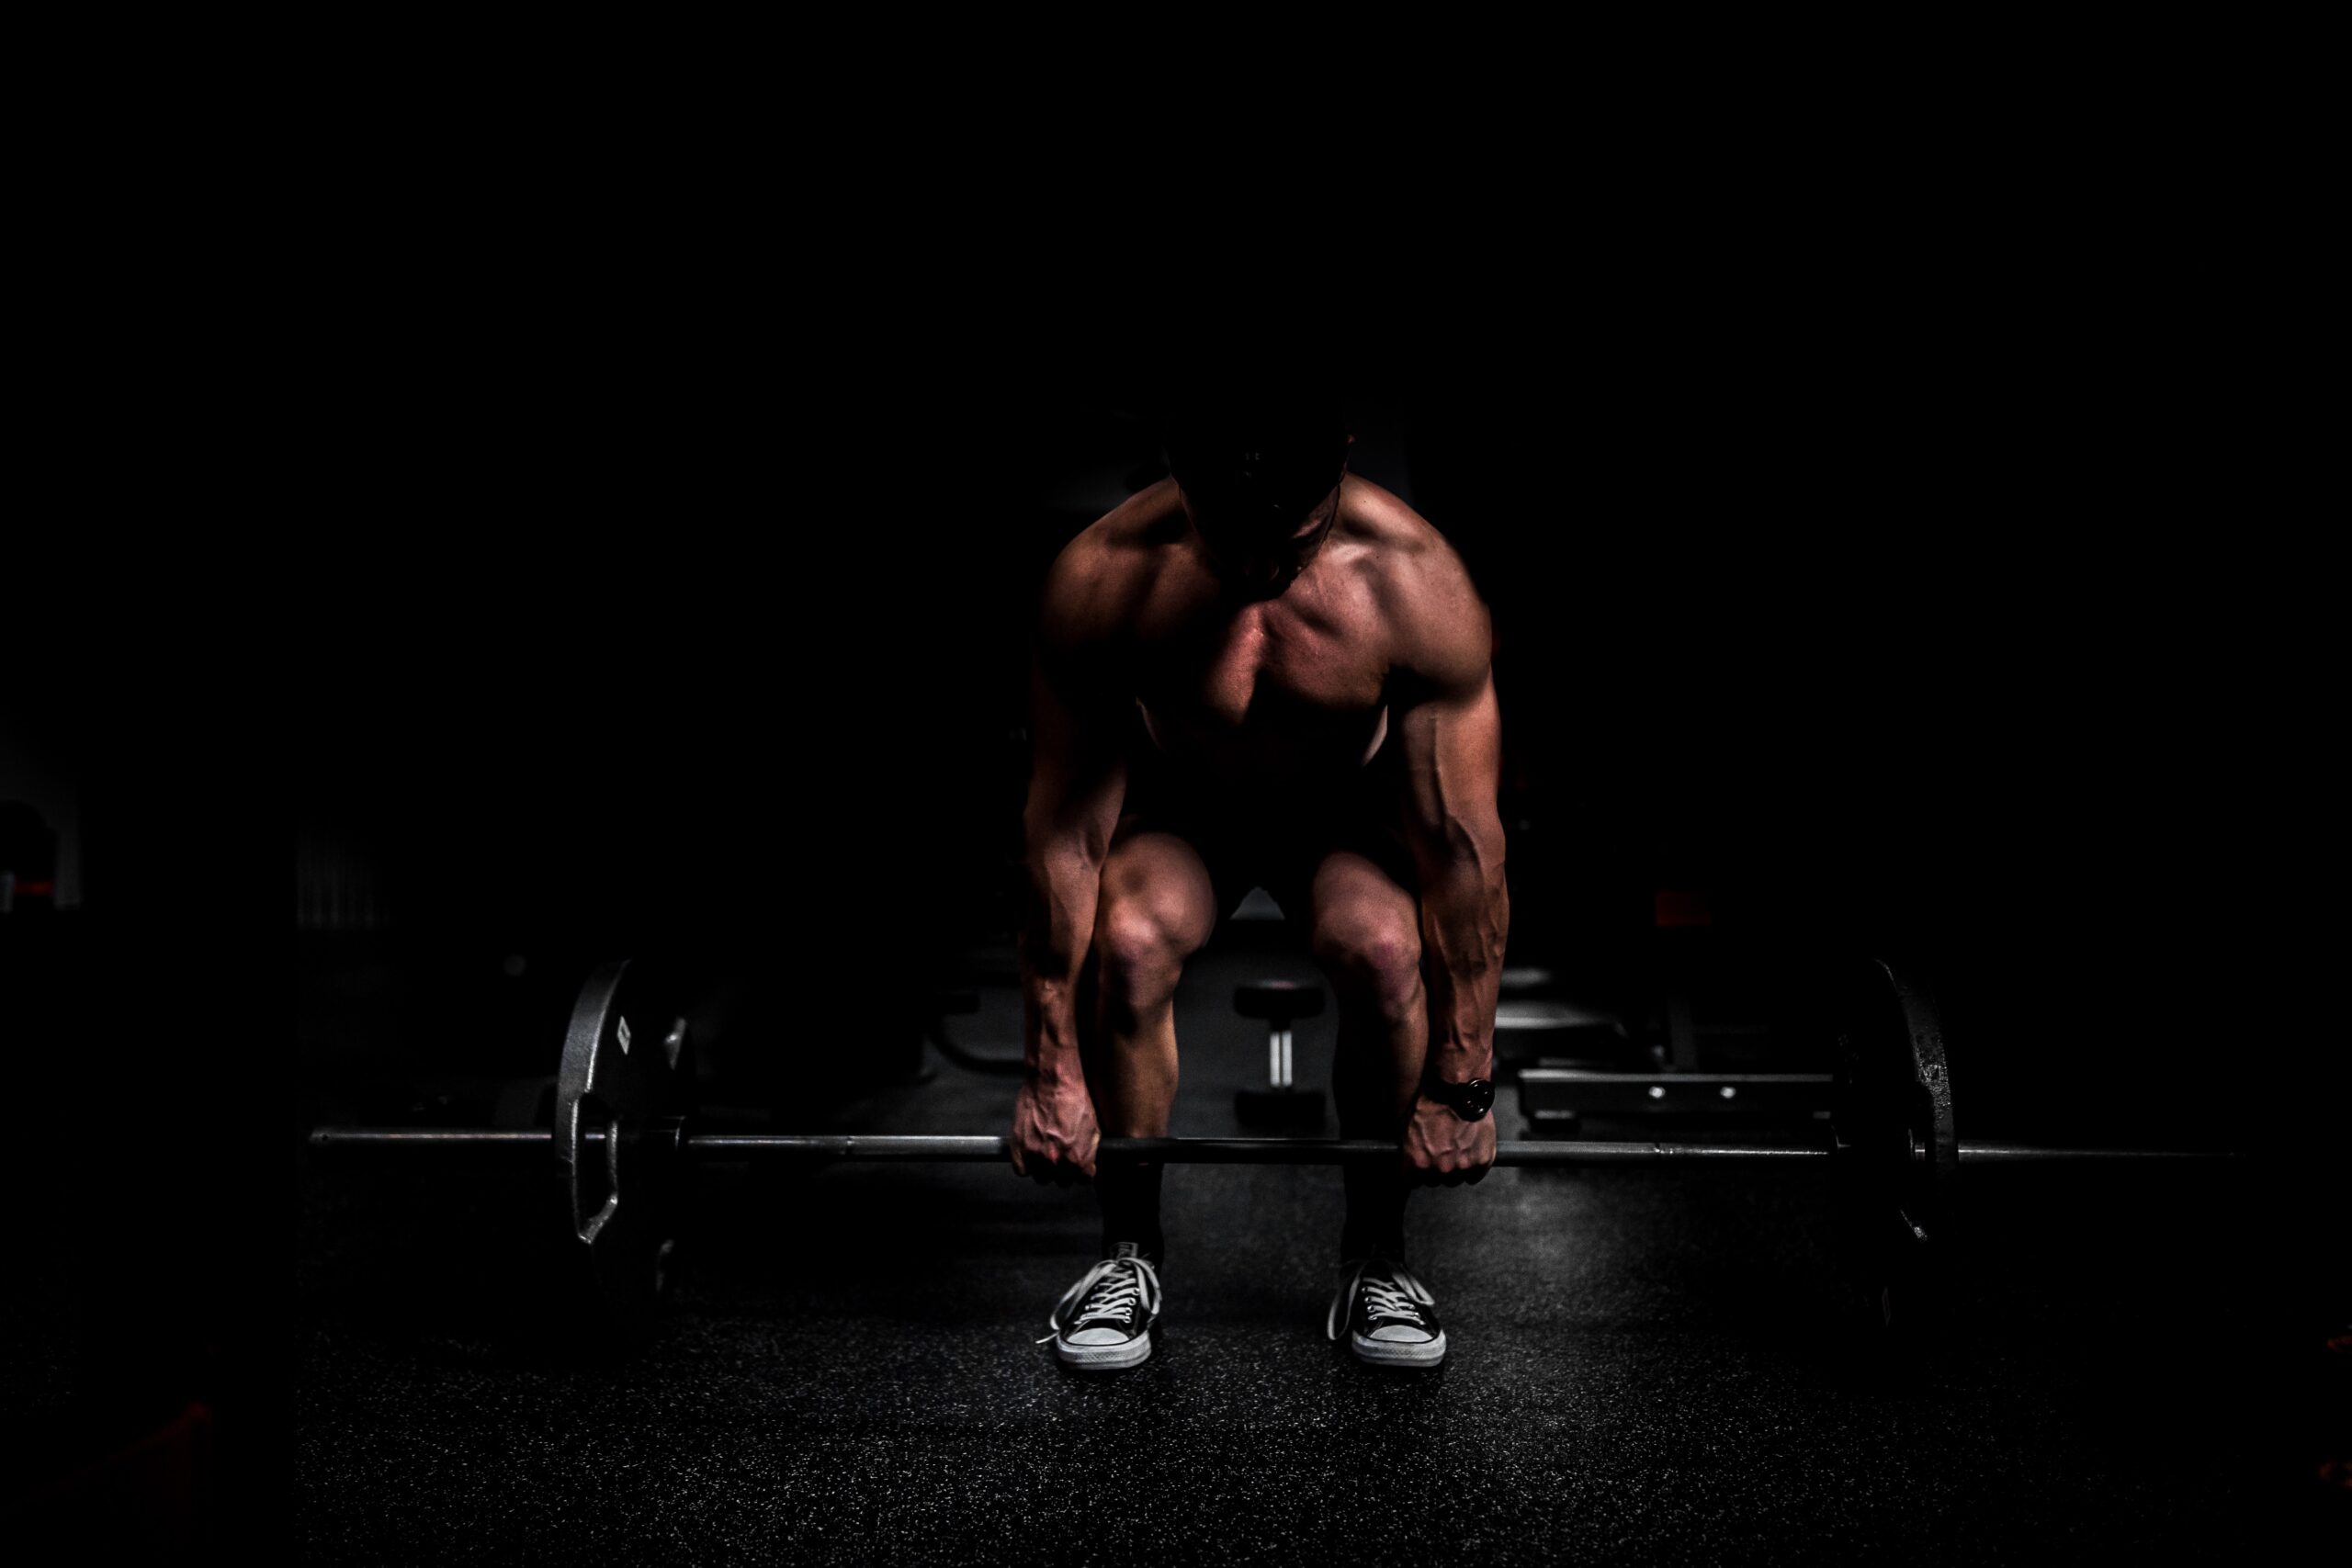 man lifting weights using the compound exercise, deadlift